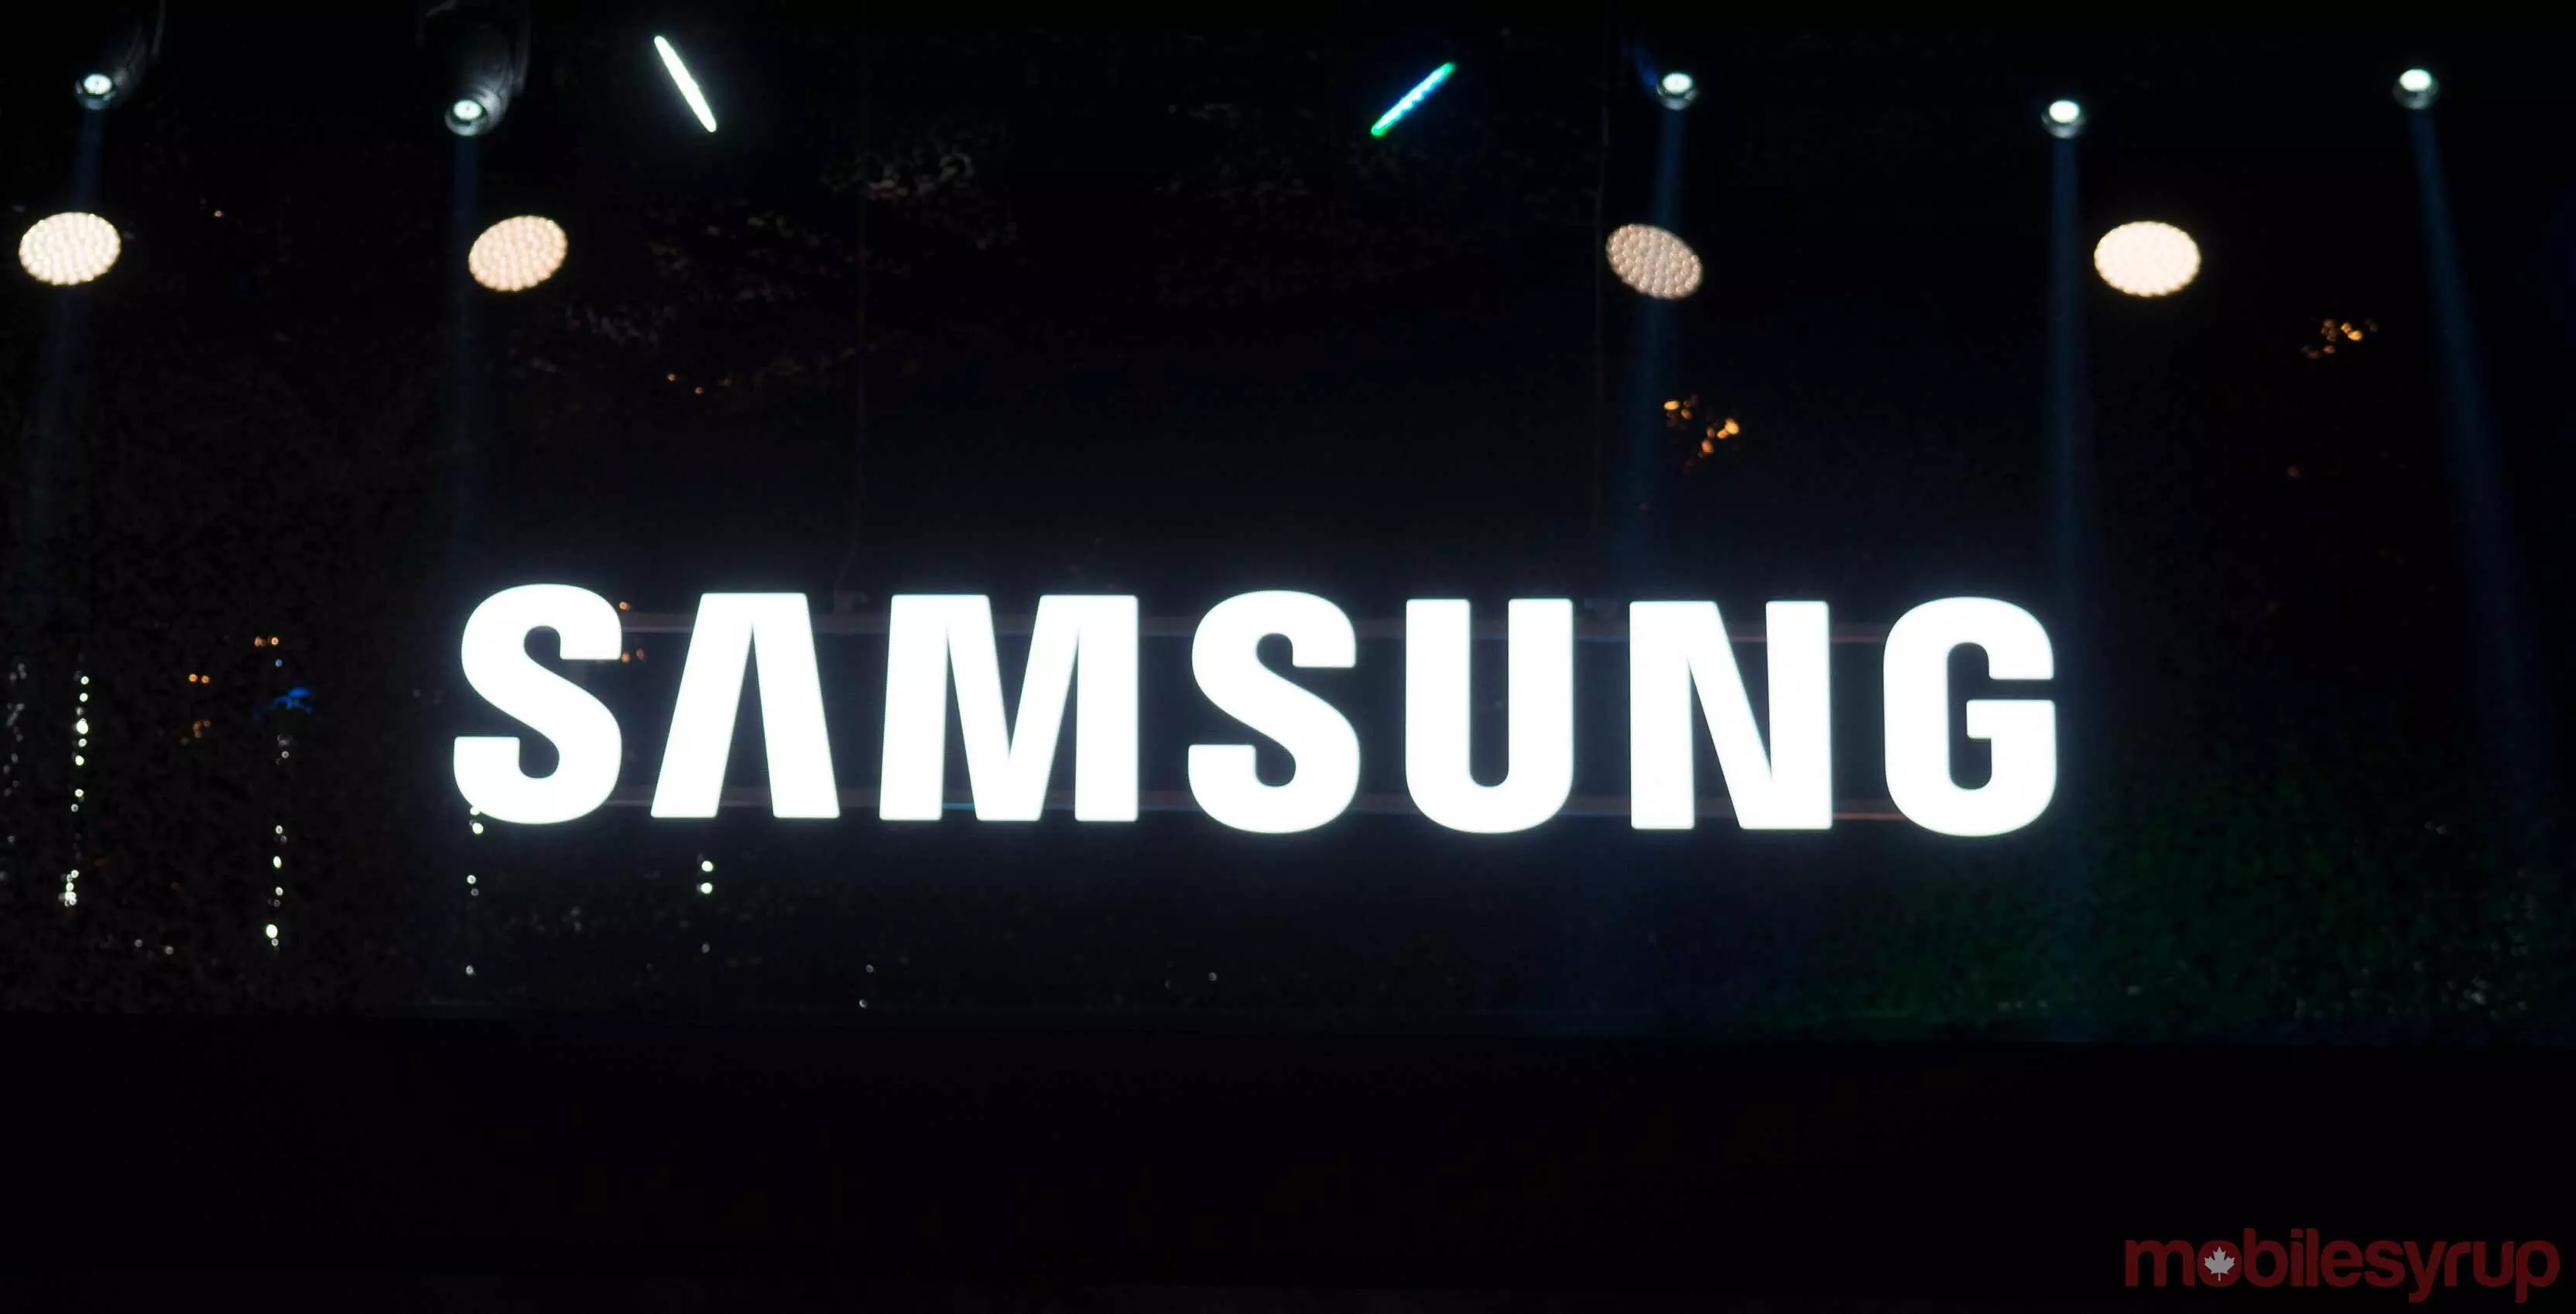 Samsung files patent for Galaxy device with transparent display